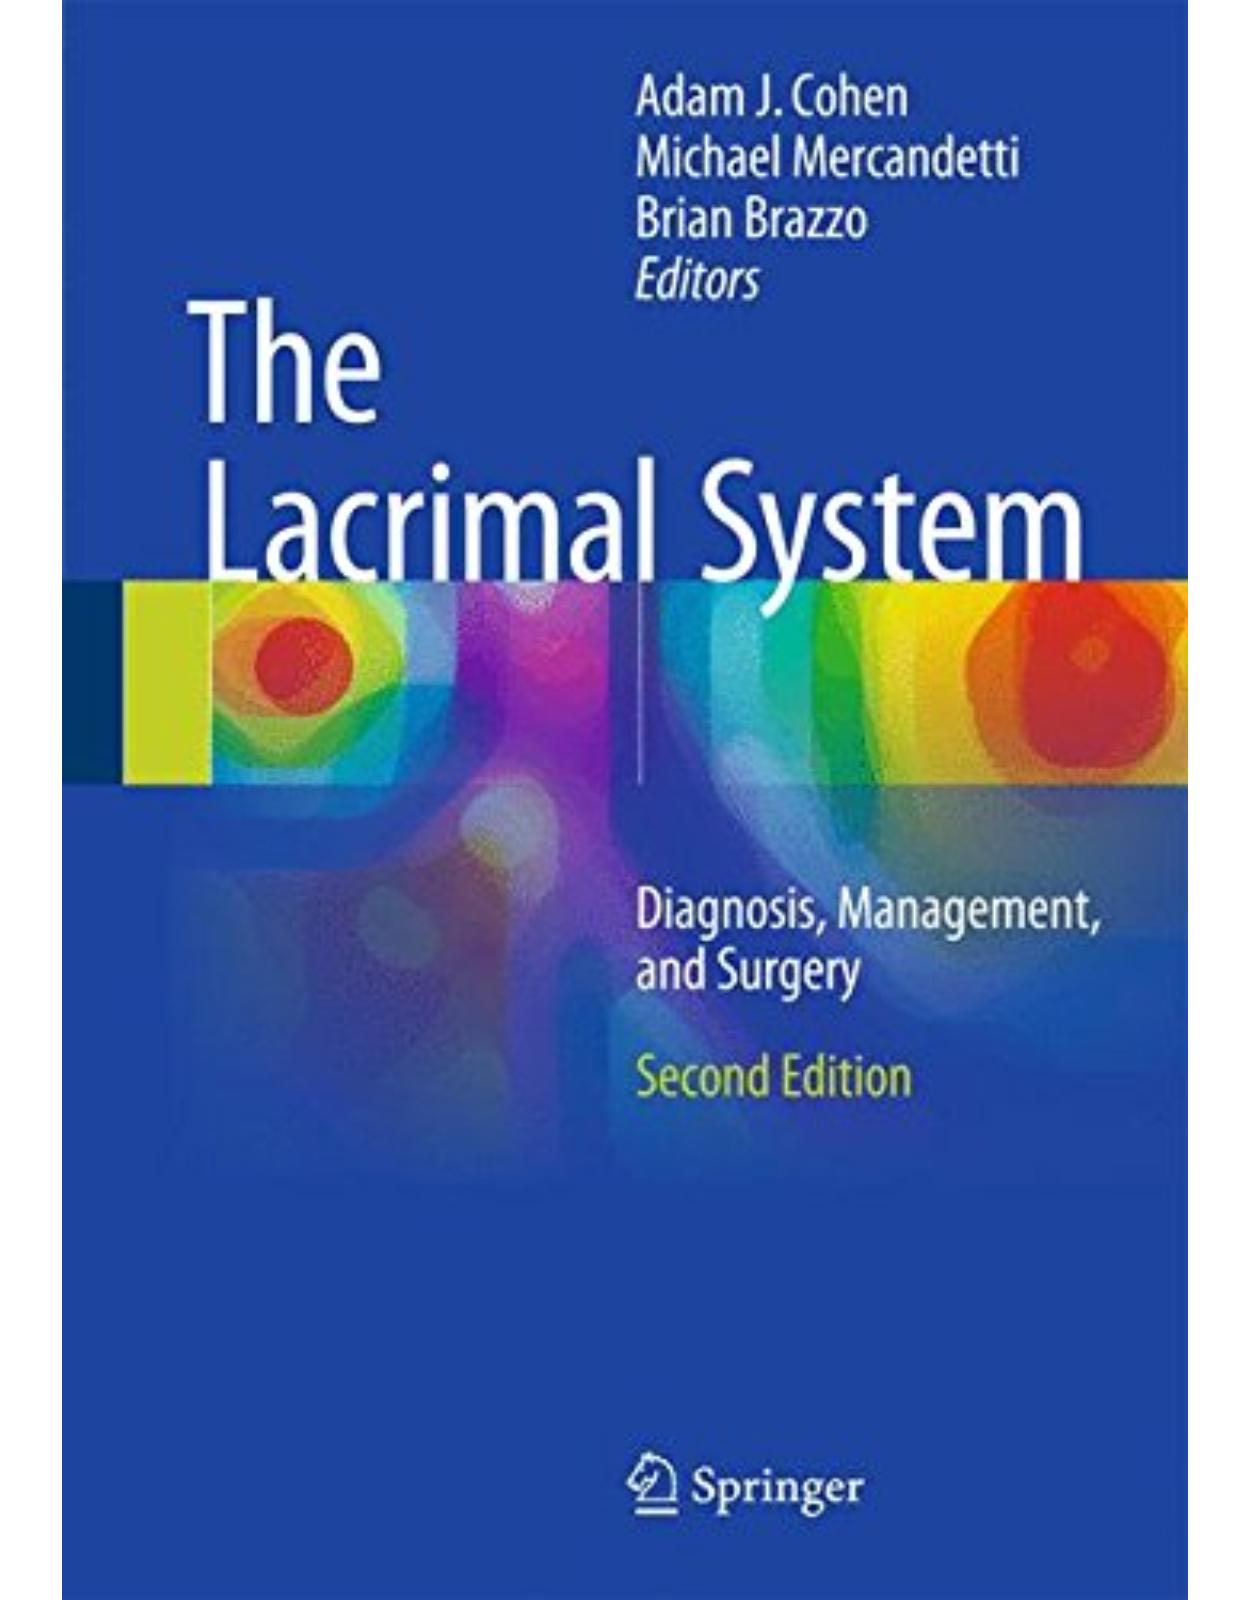 The Lacrimal System  Diagnosis, Management, and Surgery, Second Edition